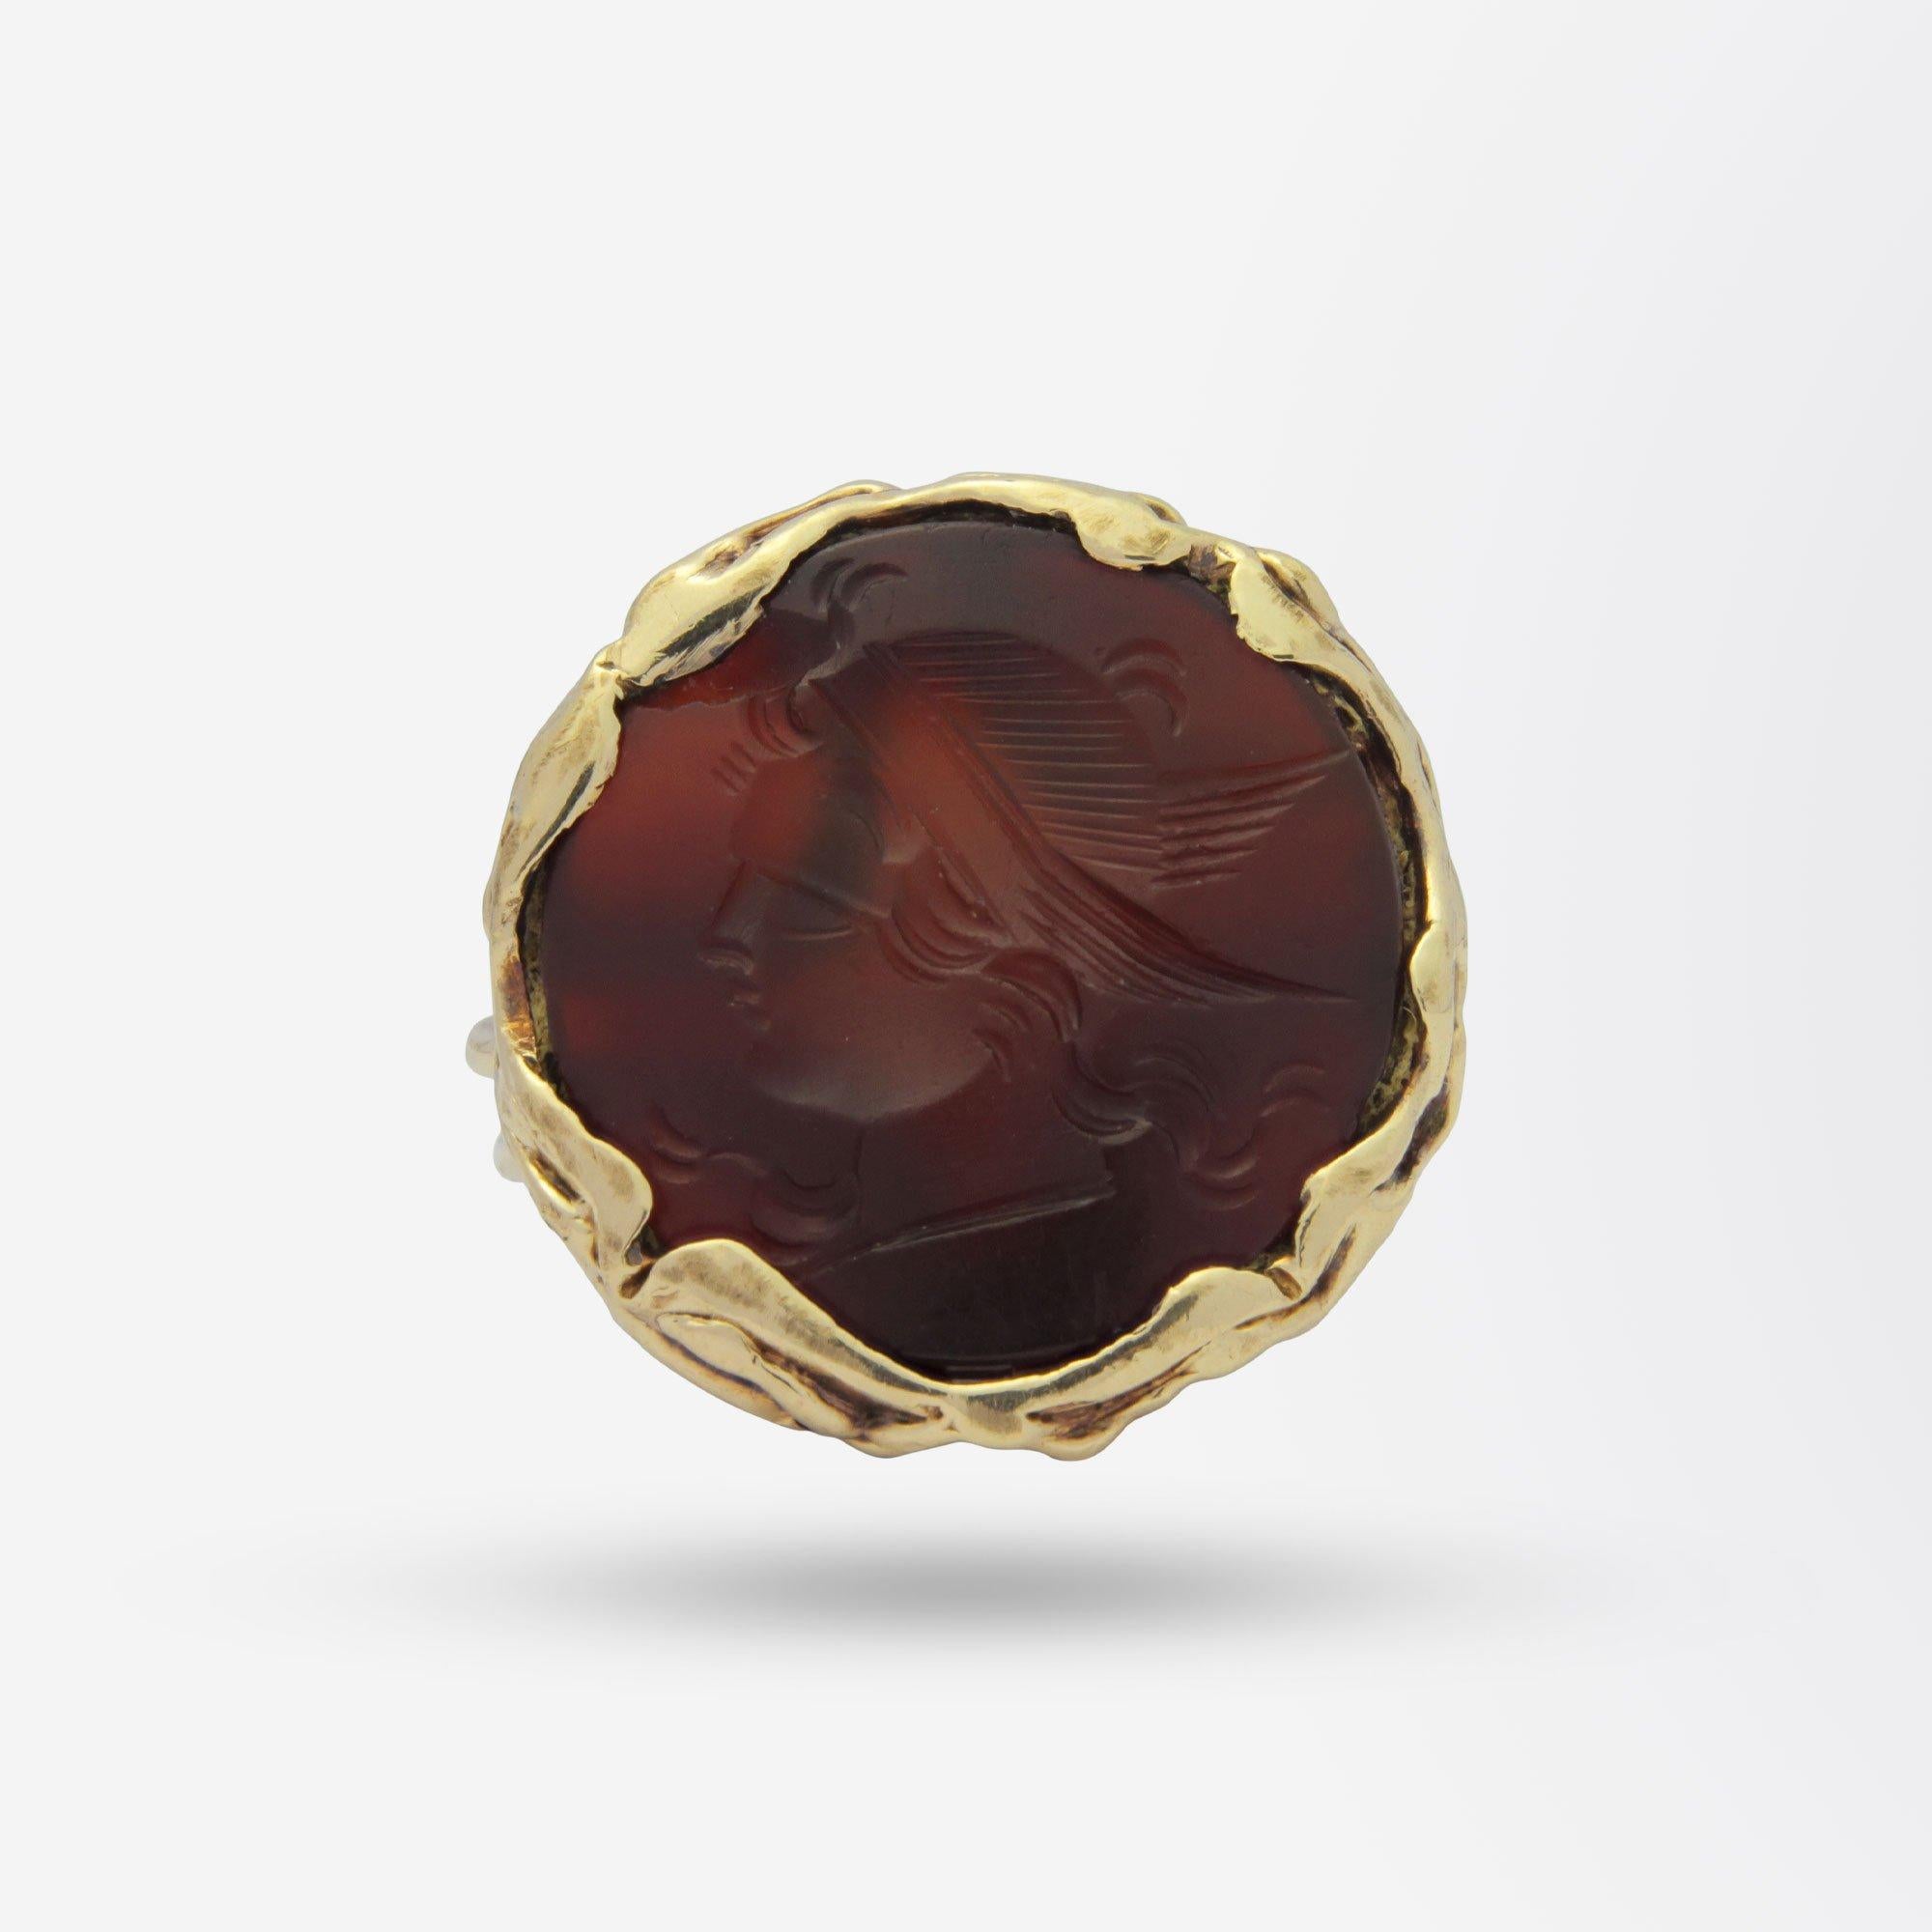 An unusual gents intaglio dress ring crafted from yellow gold and set with a carved deep red carnelian. The round twisted wire shank has split flow up shoulders which connect to the rubover set intaglio carnelian which depicts what appears to be a